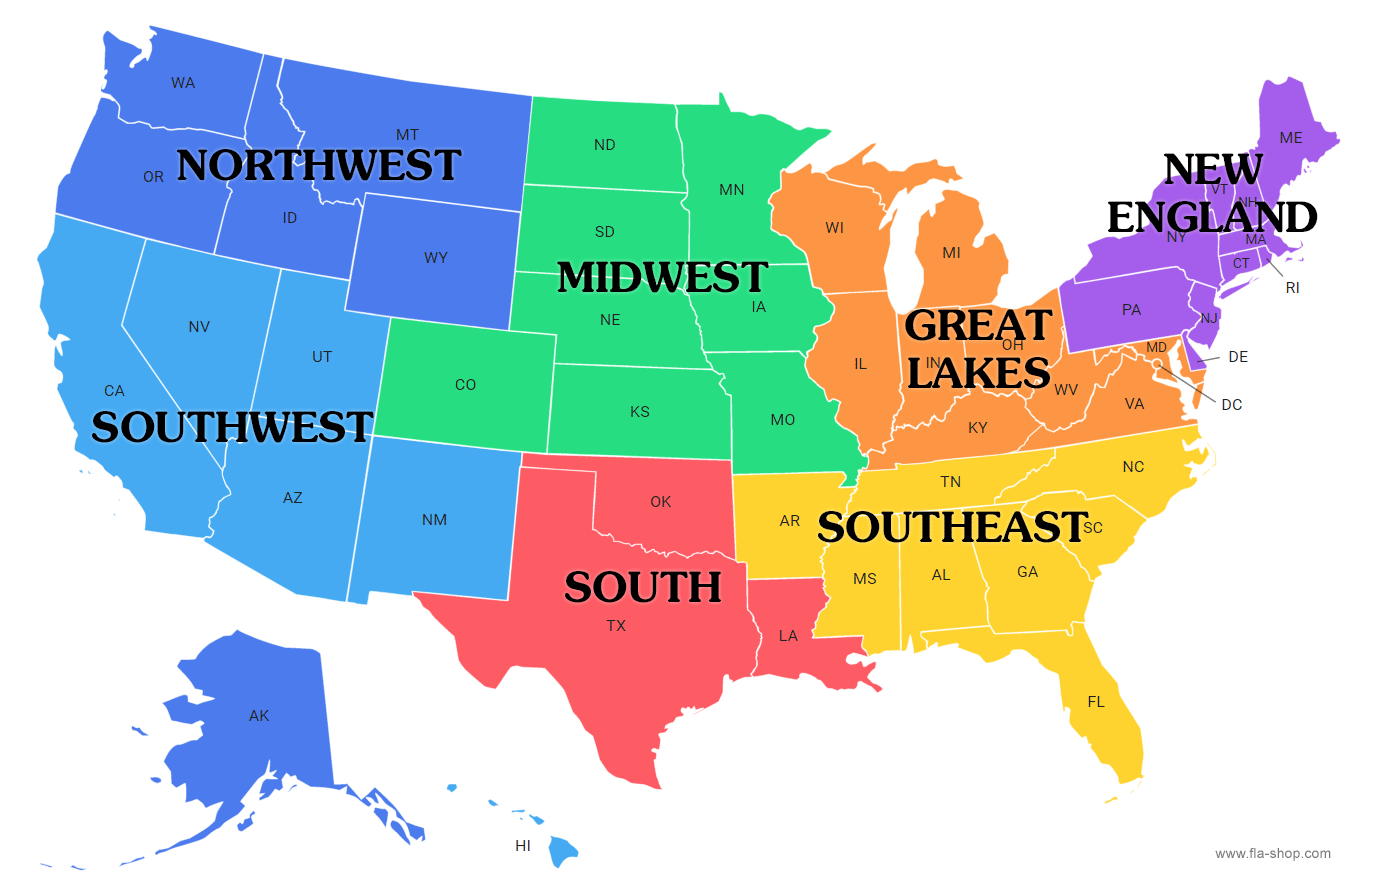 Map of the U.S. with 7 regions